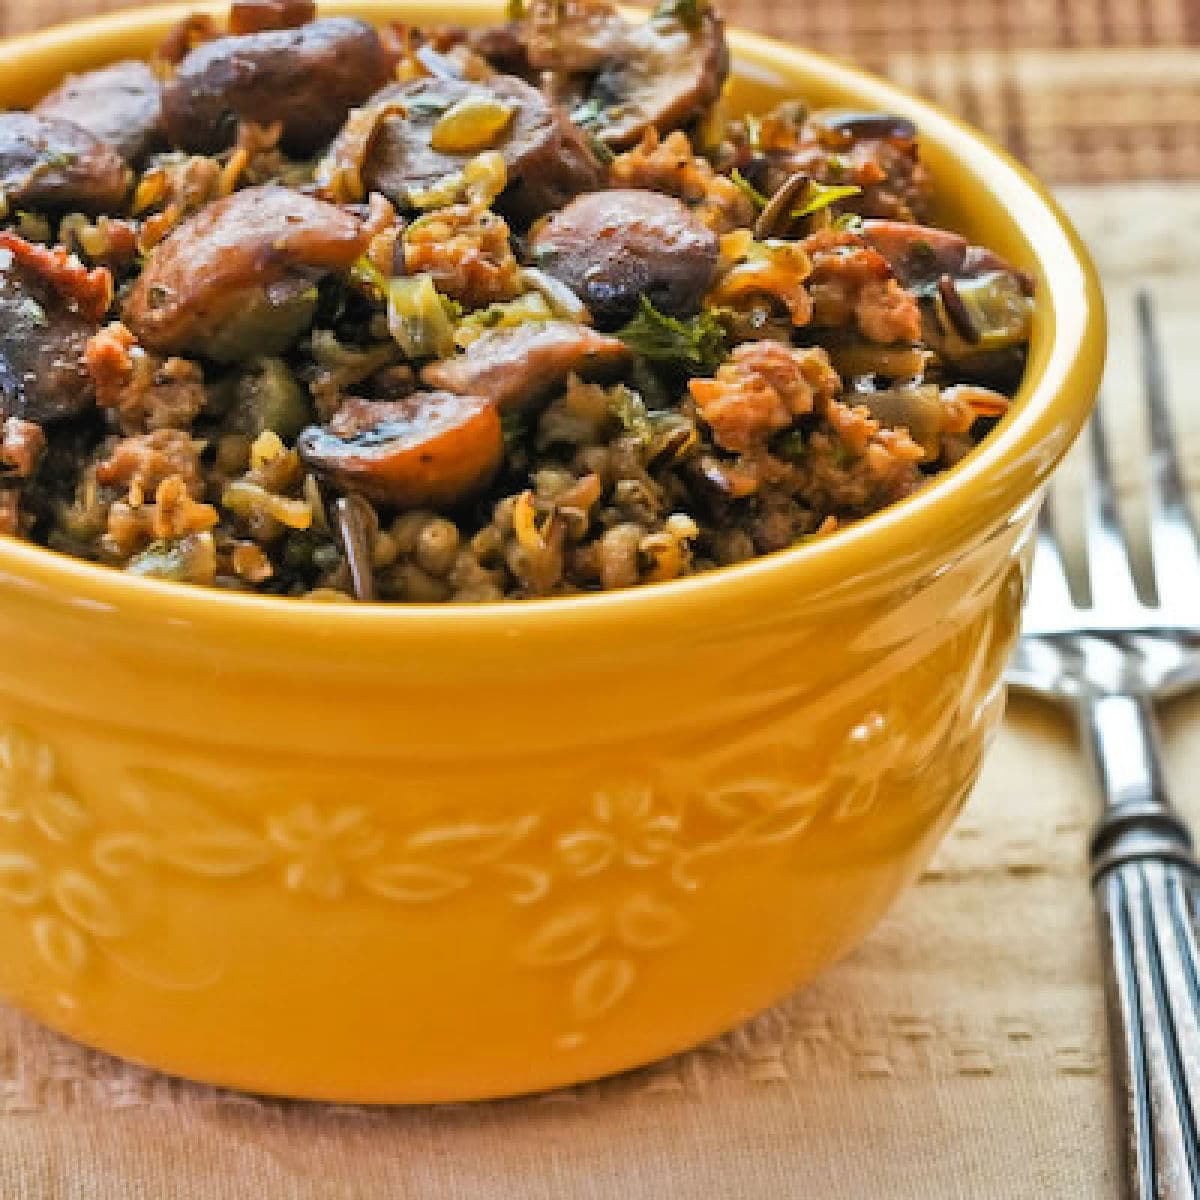 Square image for Wild Rice Stuffing with Sausage and Mushrooms shown in serving bowl.